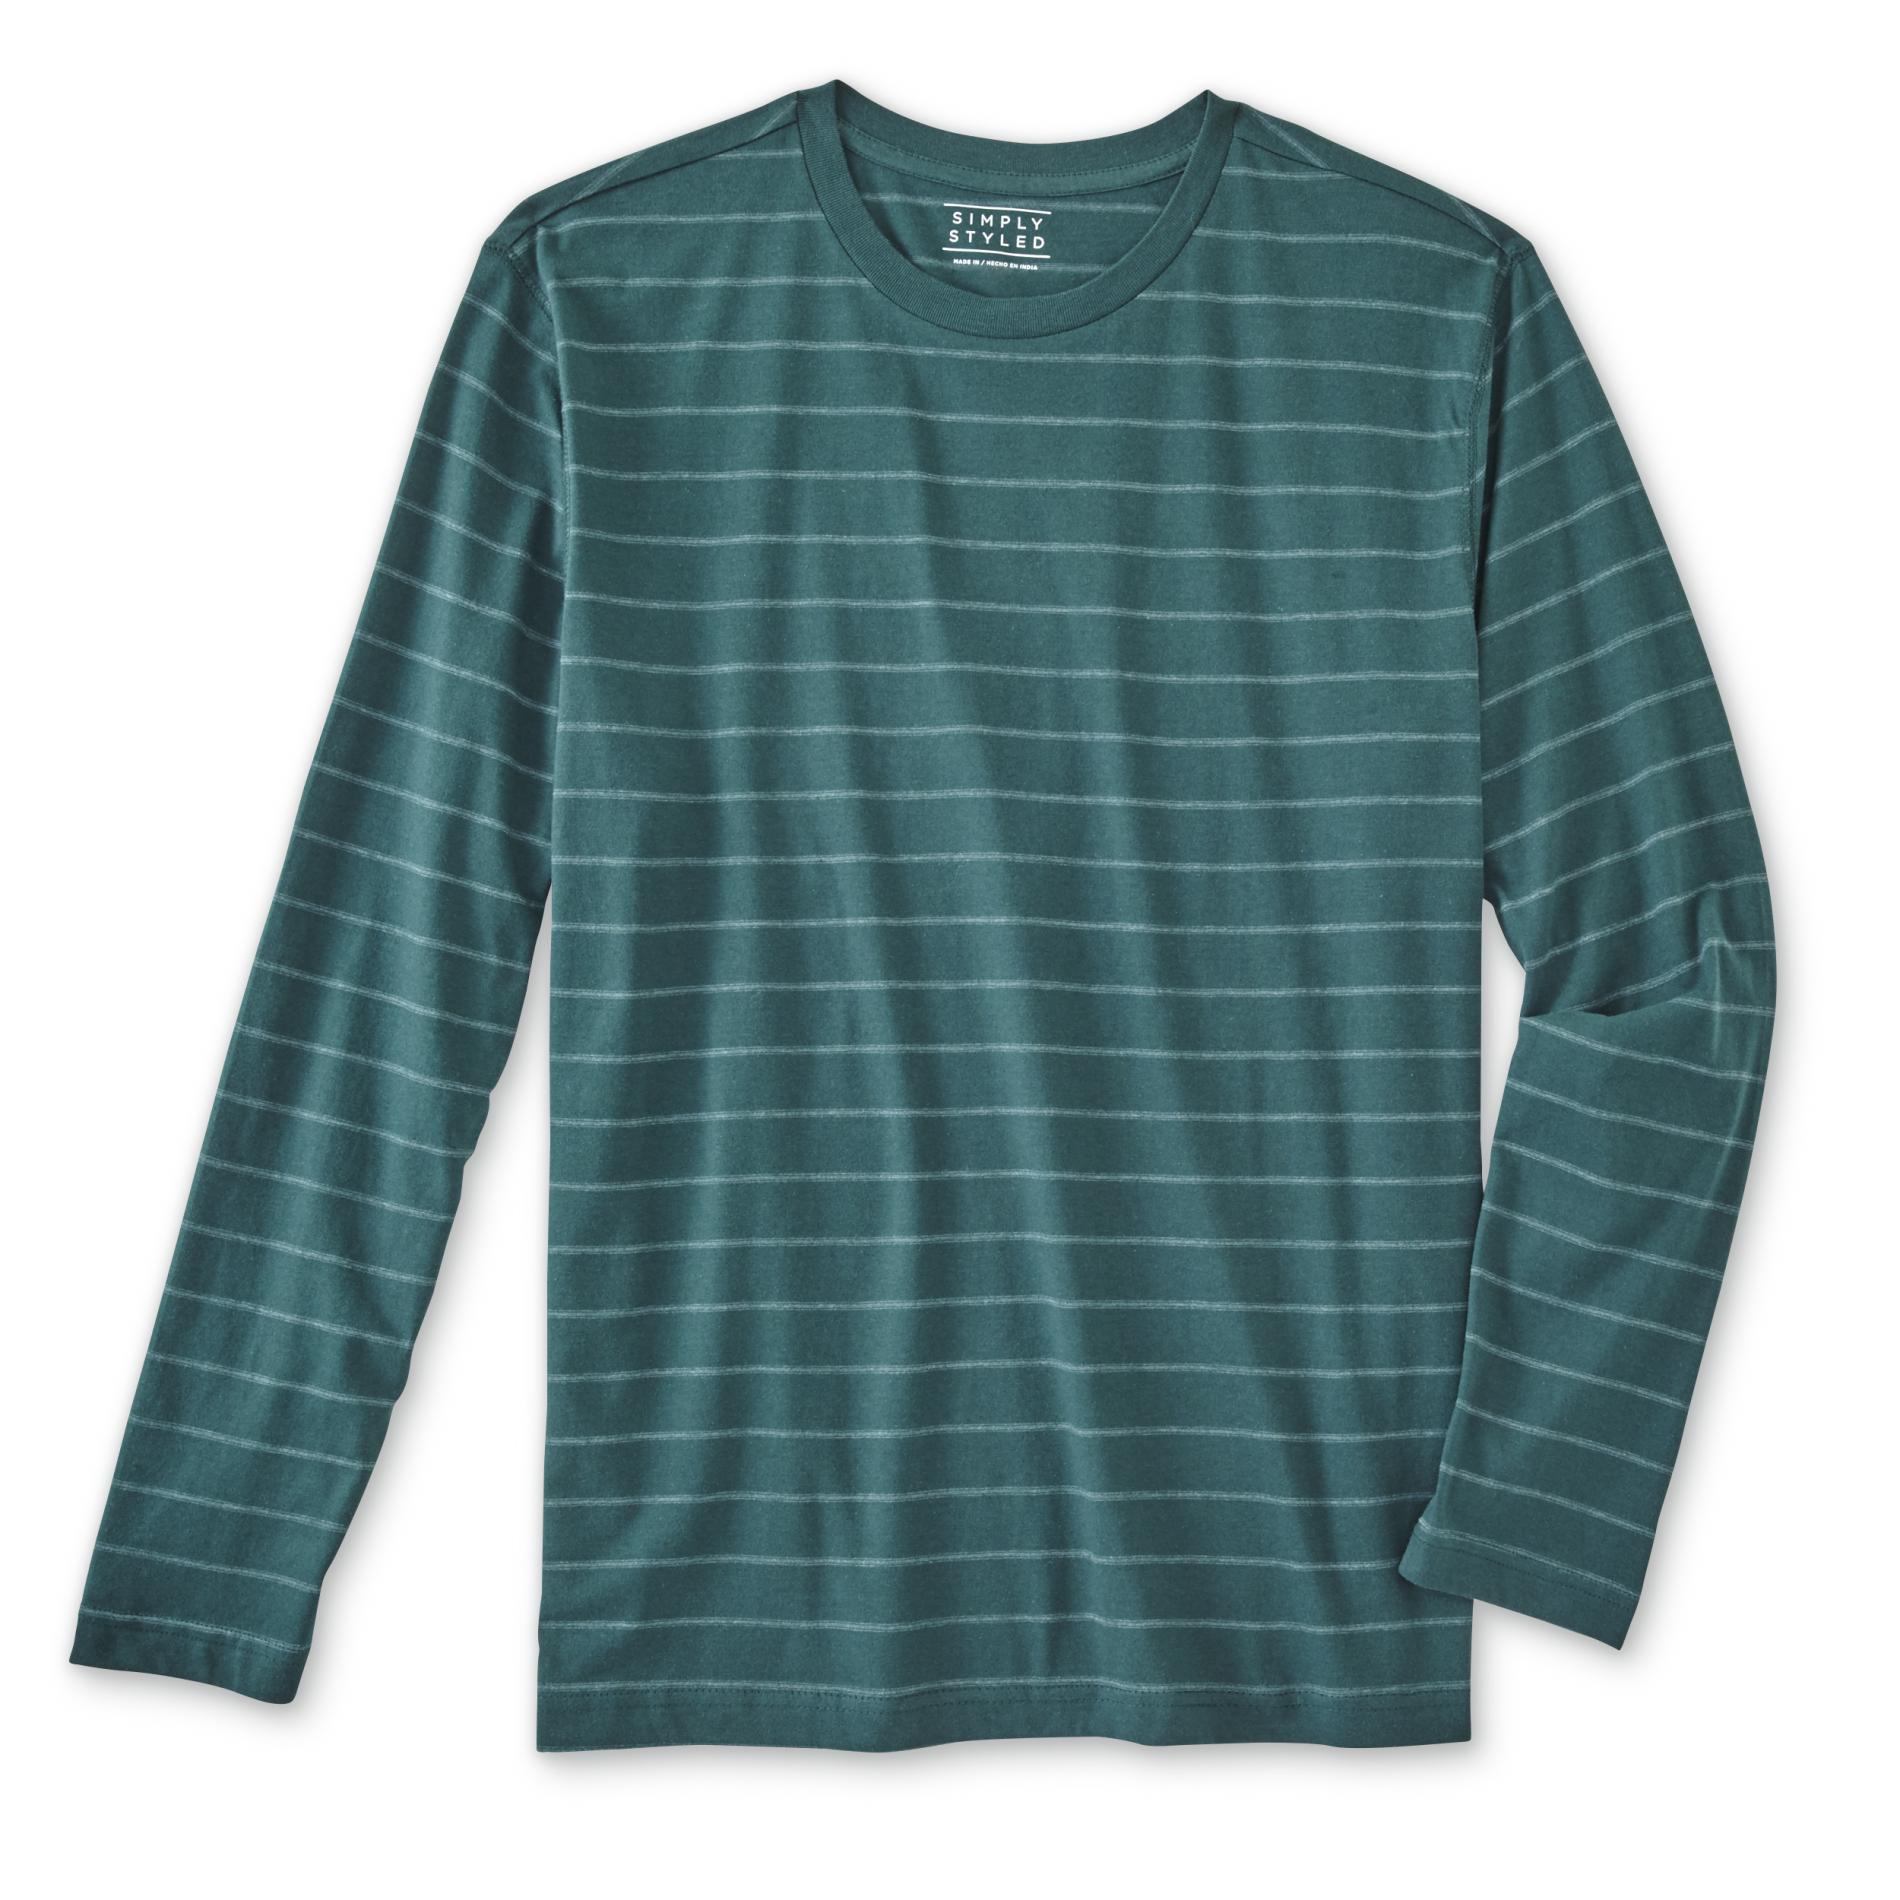 Simply Styled Men's Long-Sleeve T-Shirt - Striped